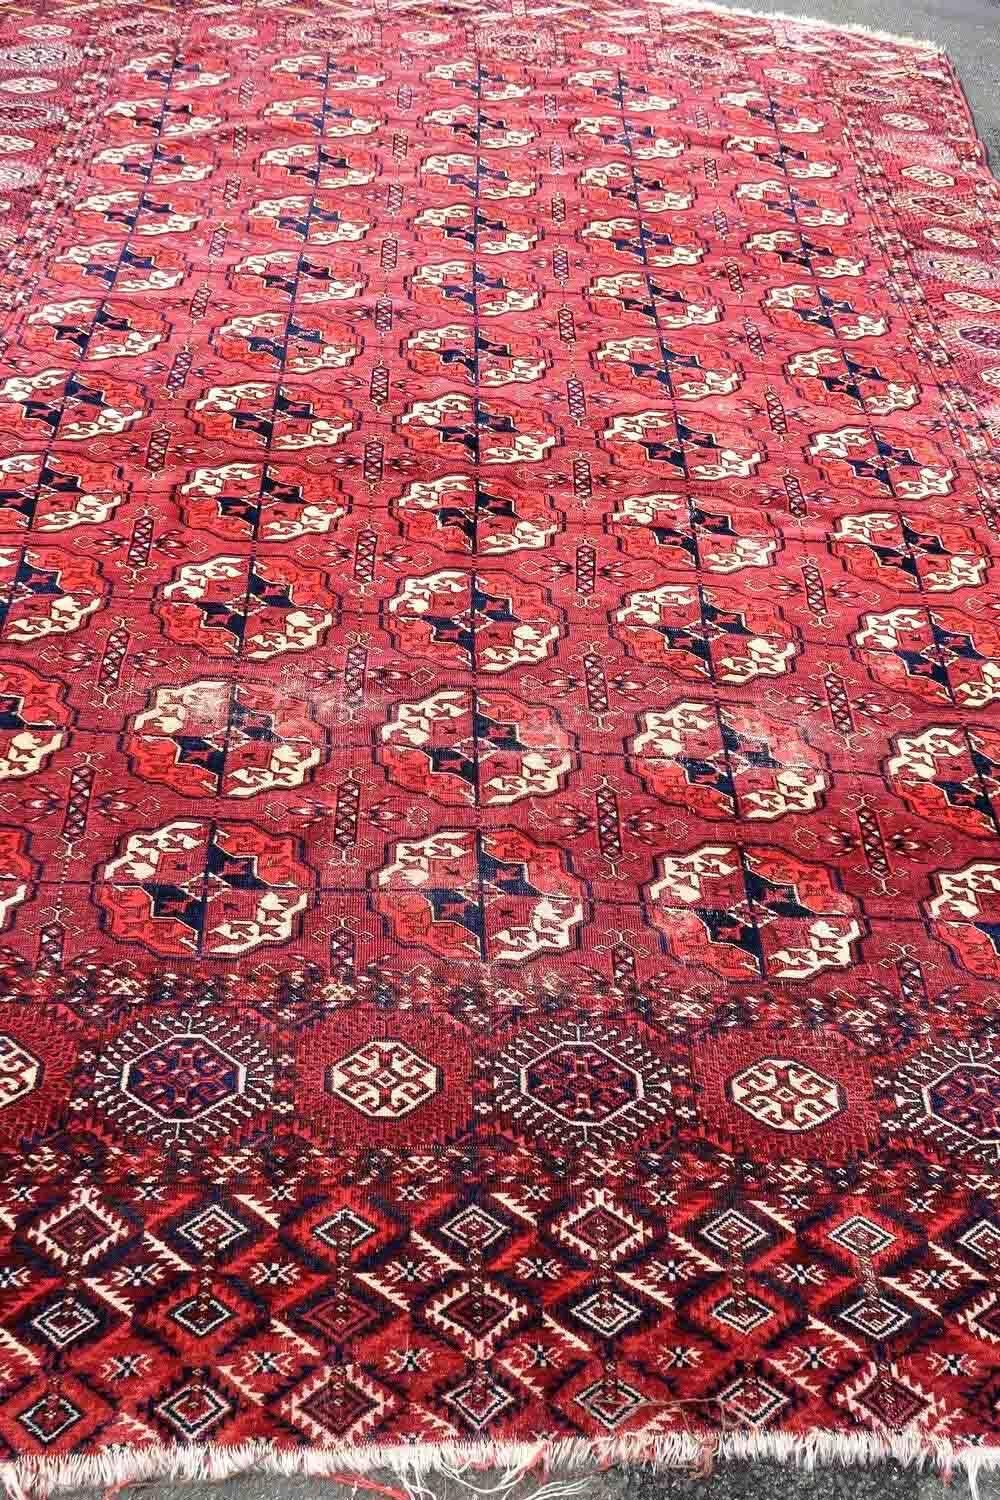 Handmade antique Turkmen Tekke rug in traditional design. The rug is from the end of 19th century in original condition, it has some low pile.

-condition: original, some low pile,

-circa: 1870s,

-size: 6.8' x 8.6' (210cm x